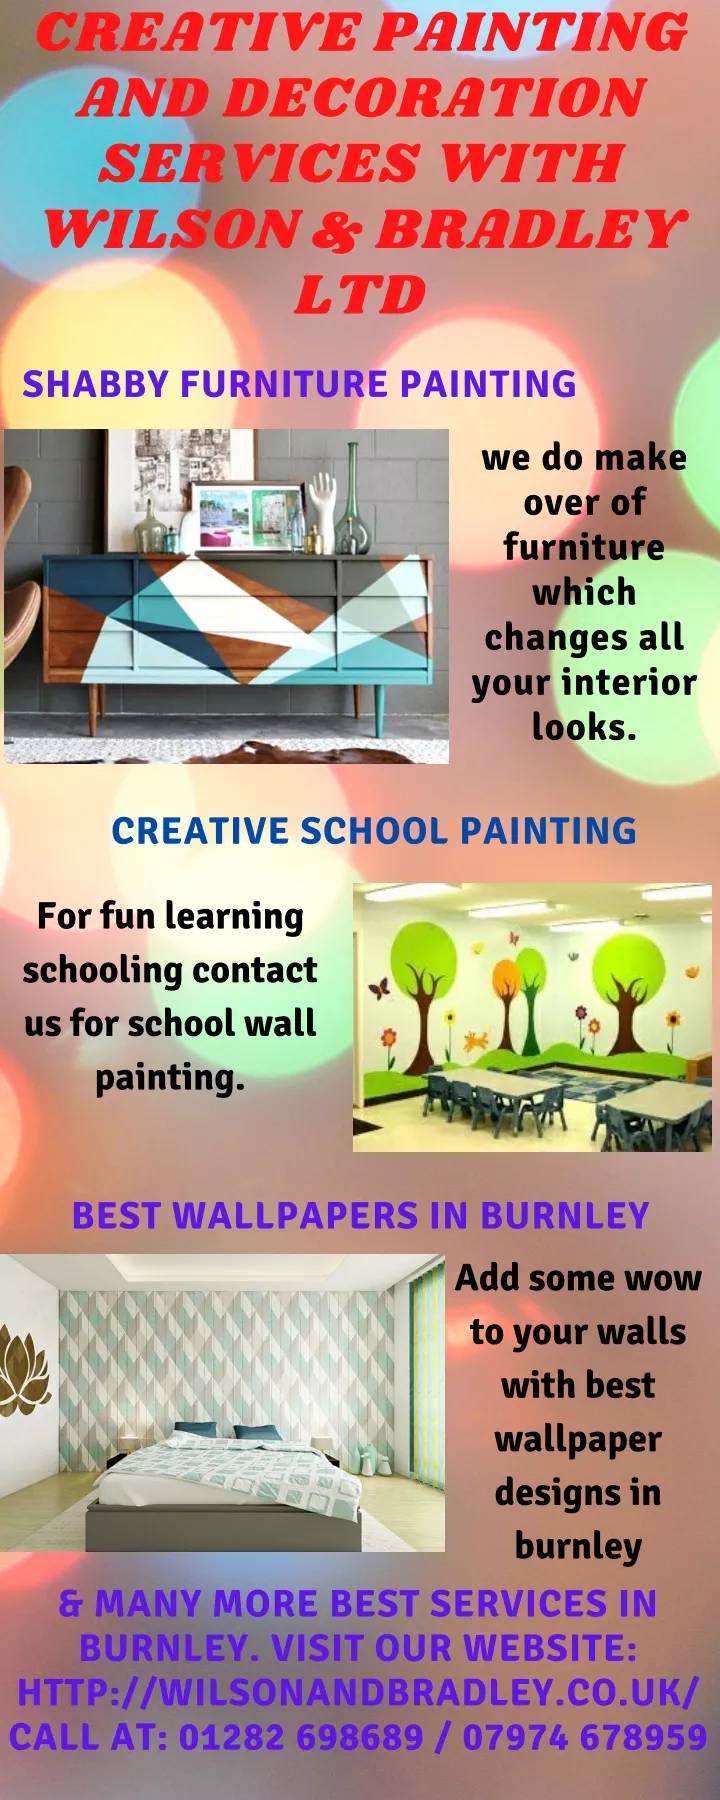 creative painting and decoration services with